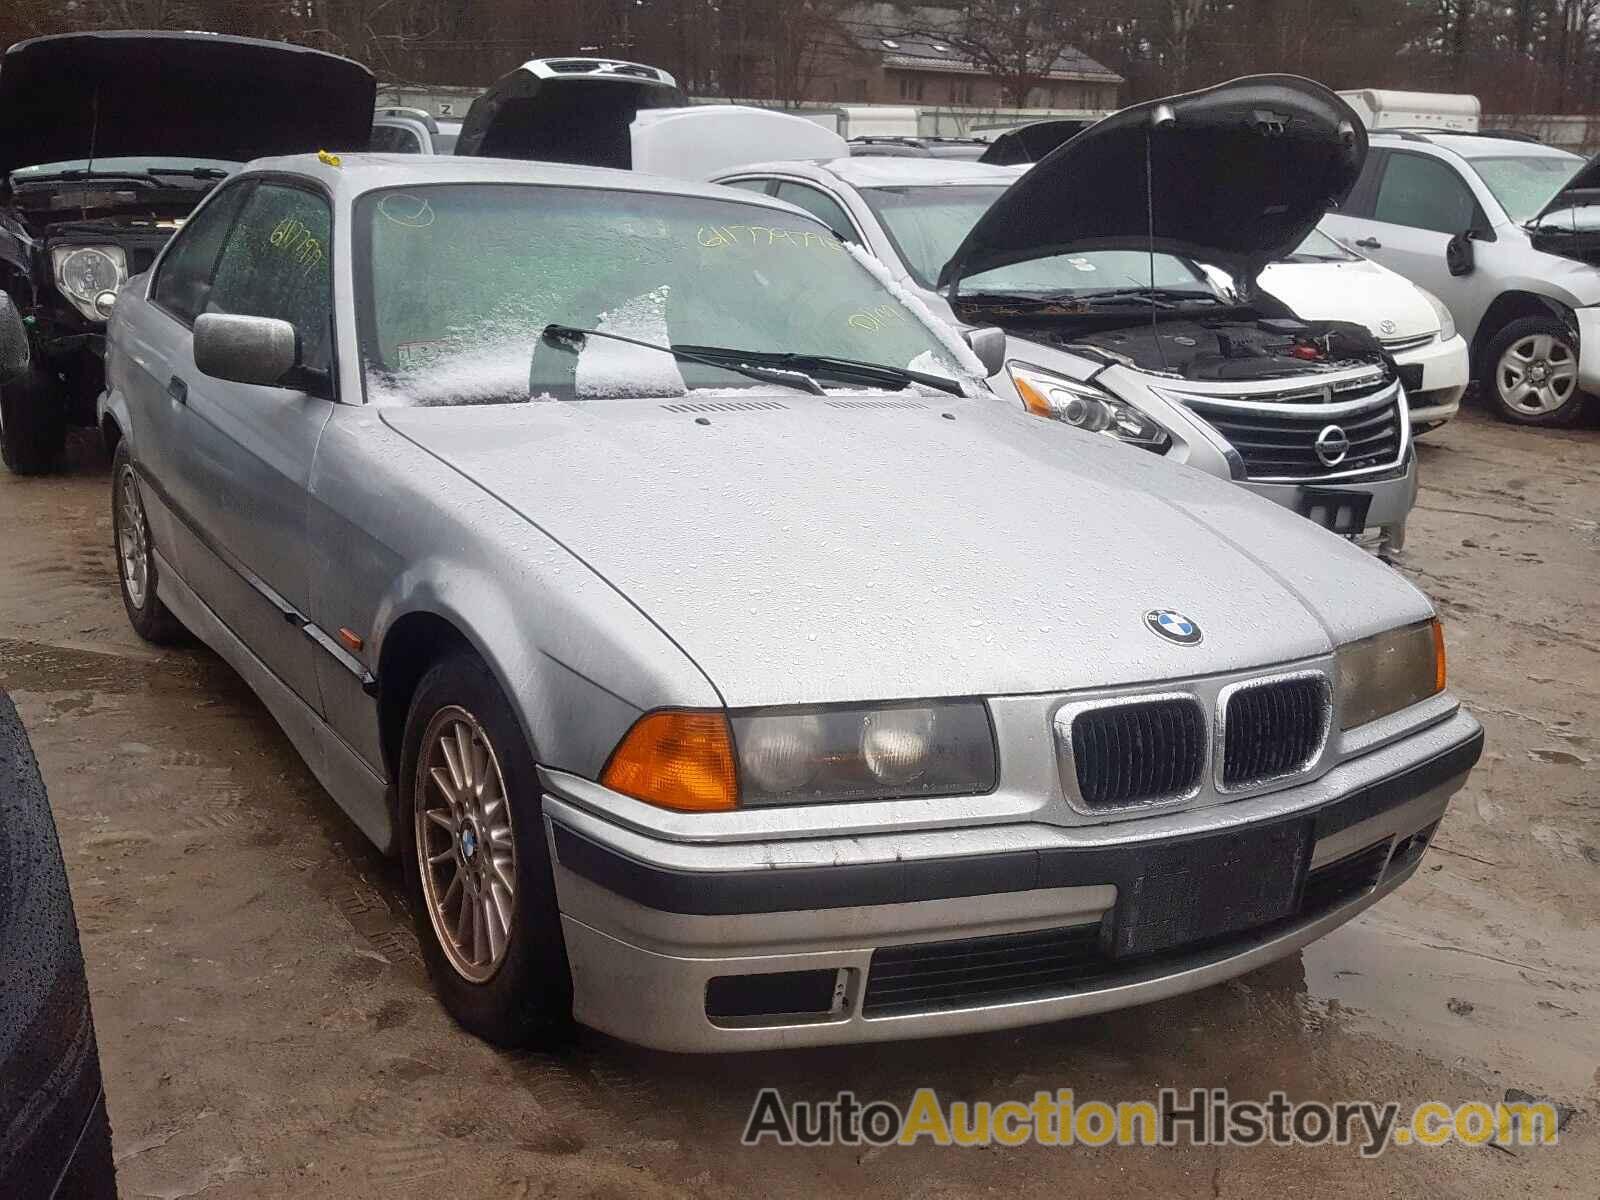 1998 BMW 323 IS AUT IS AUTOMATIC, WBABF8321WEH62056